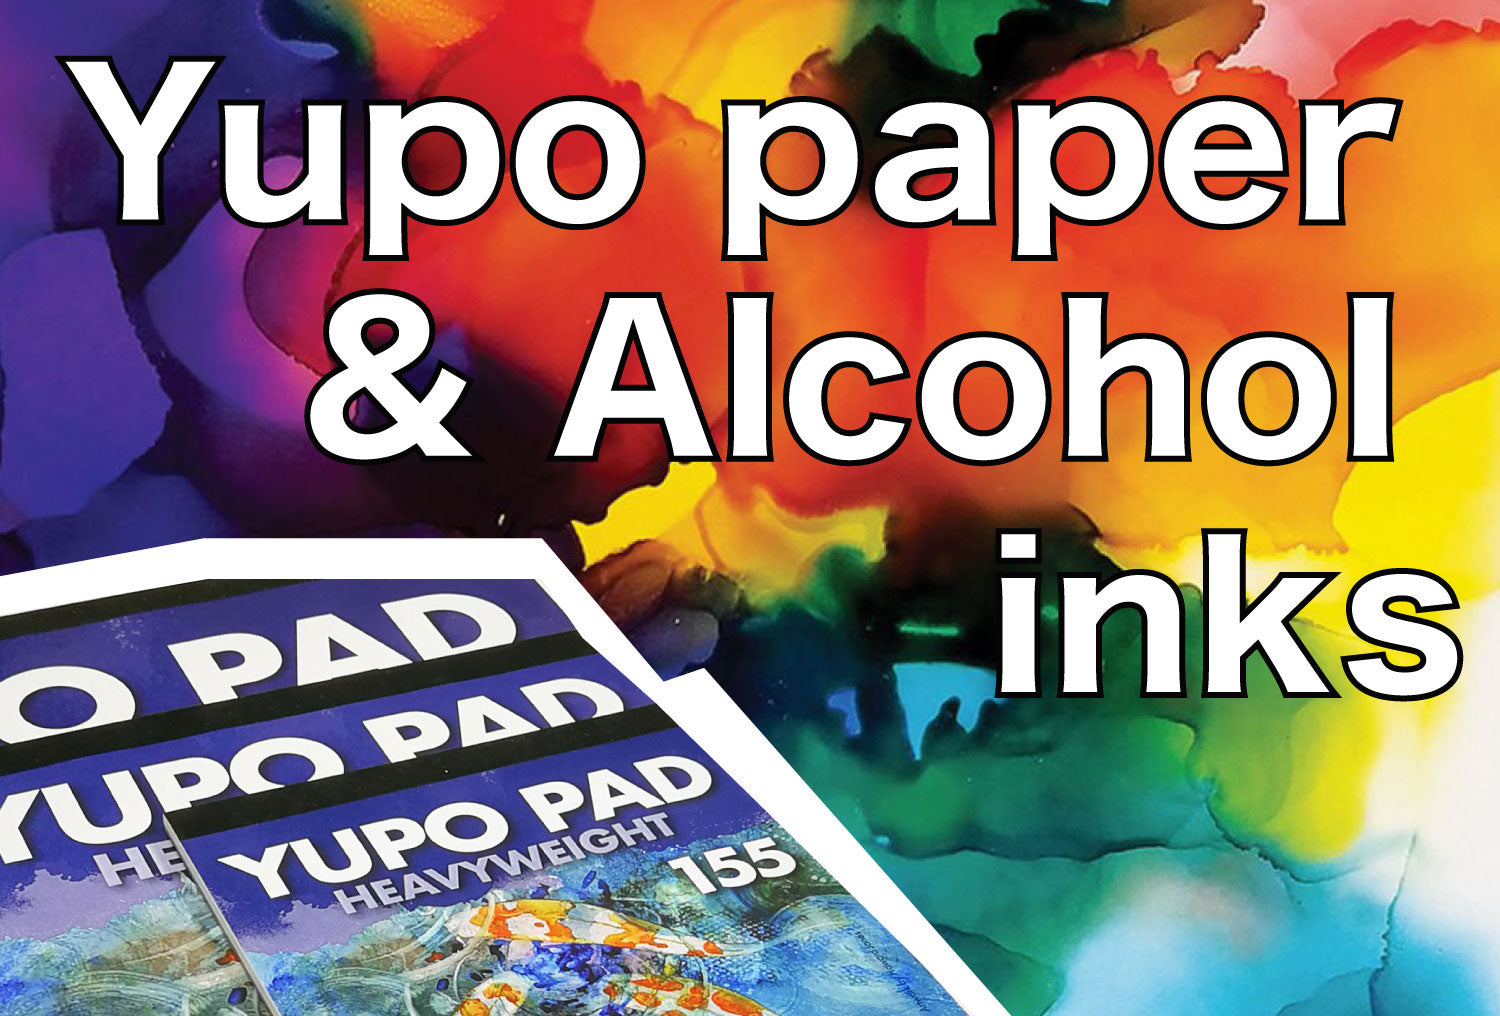 A brief introduction to Yupo paper and alcohol inks